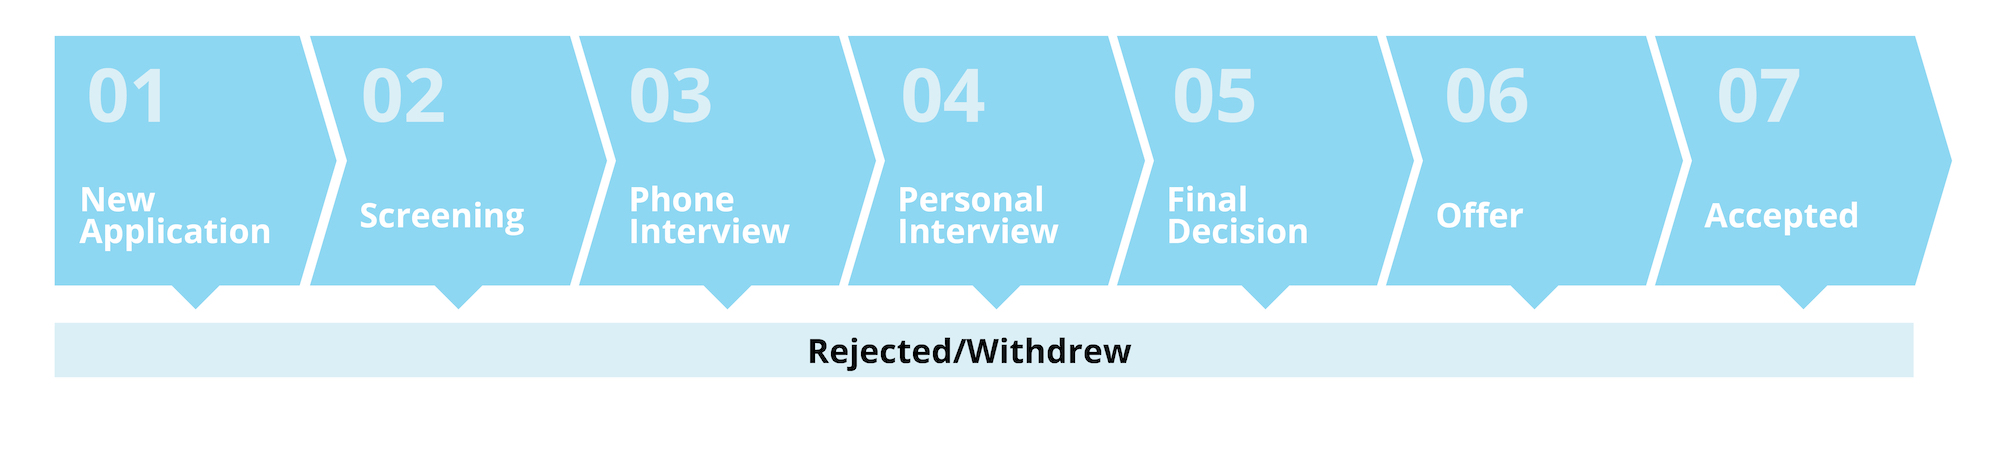 Recruiting-Process-Graphic_es.png